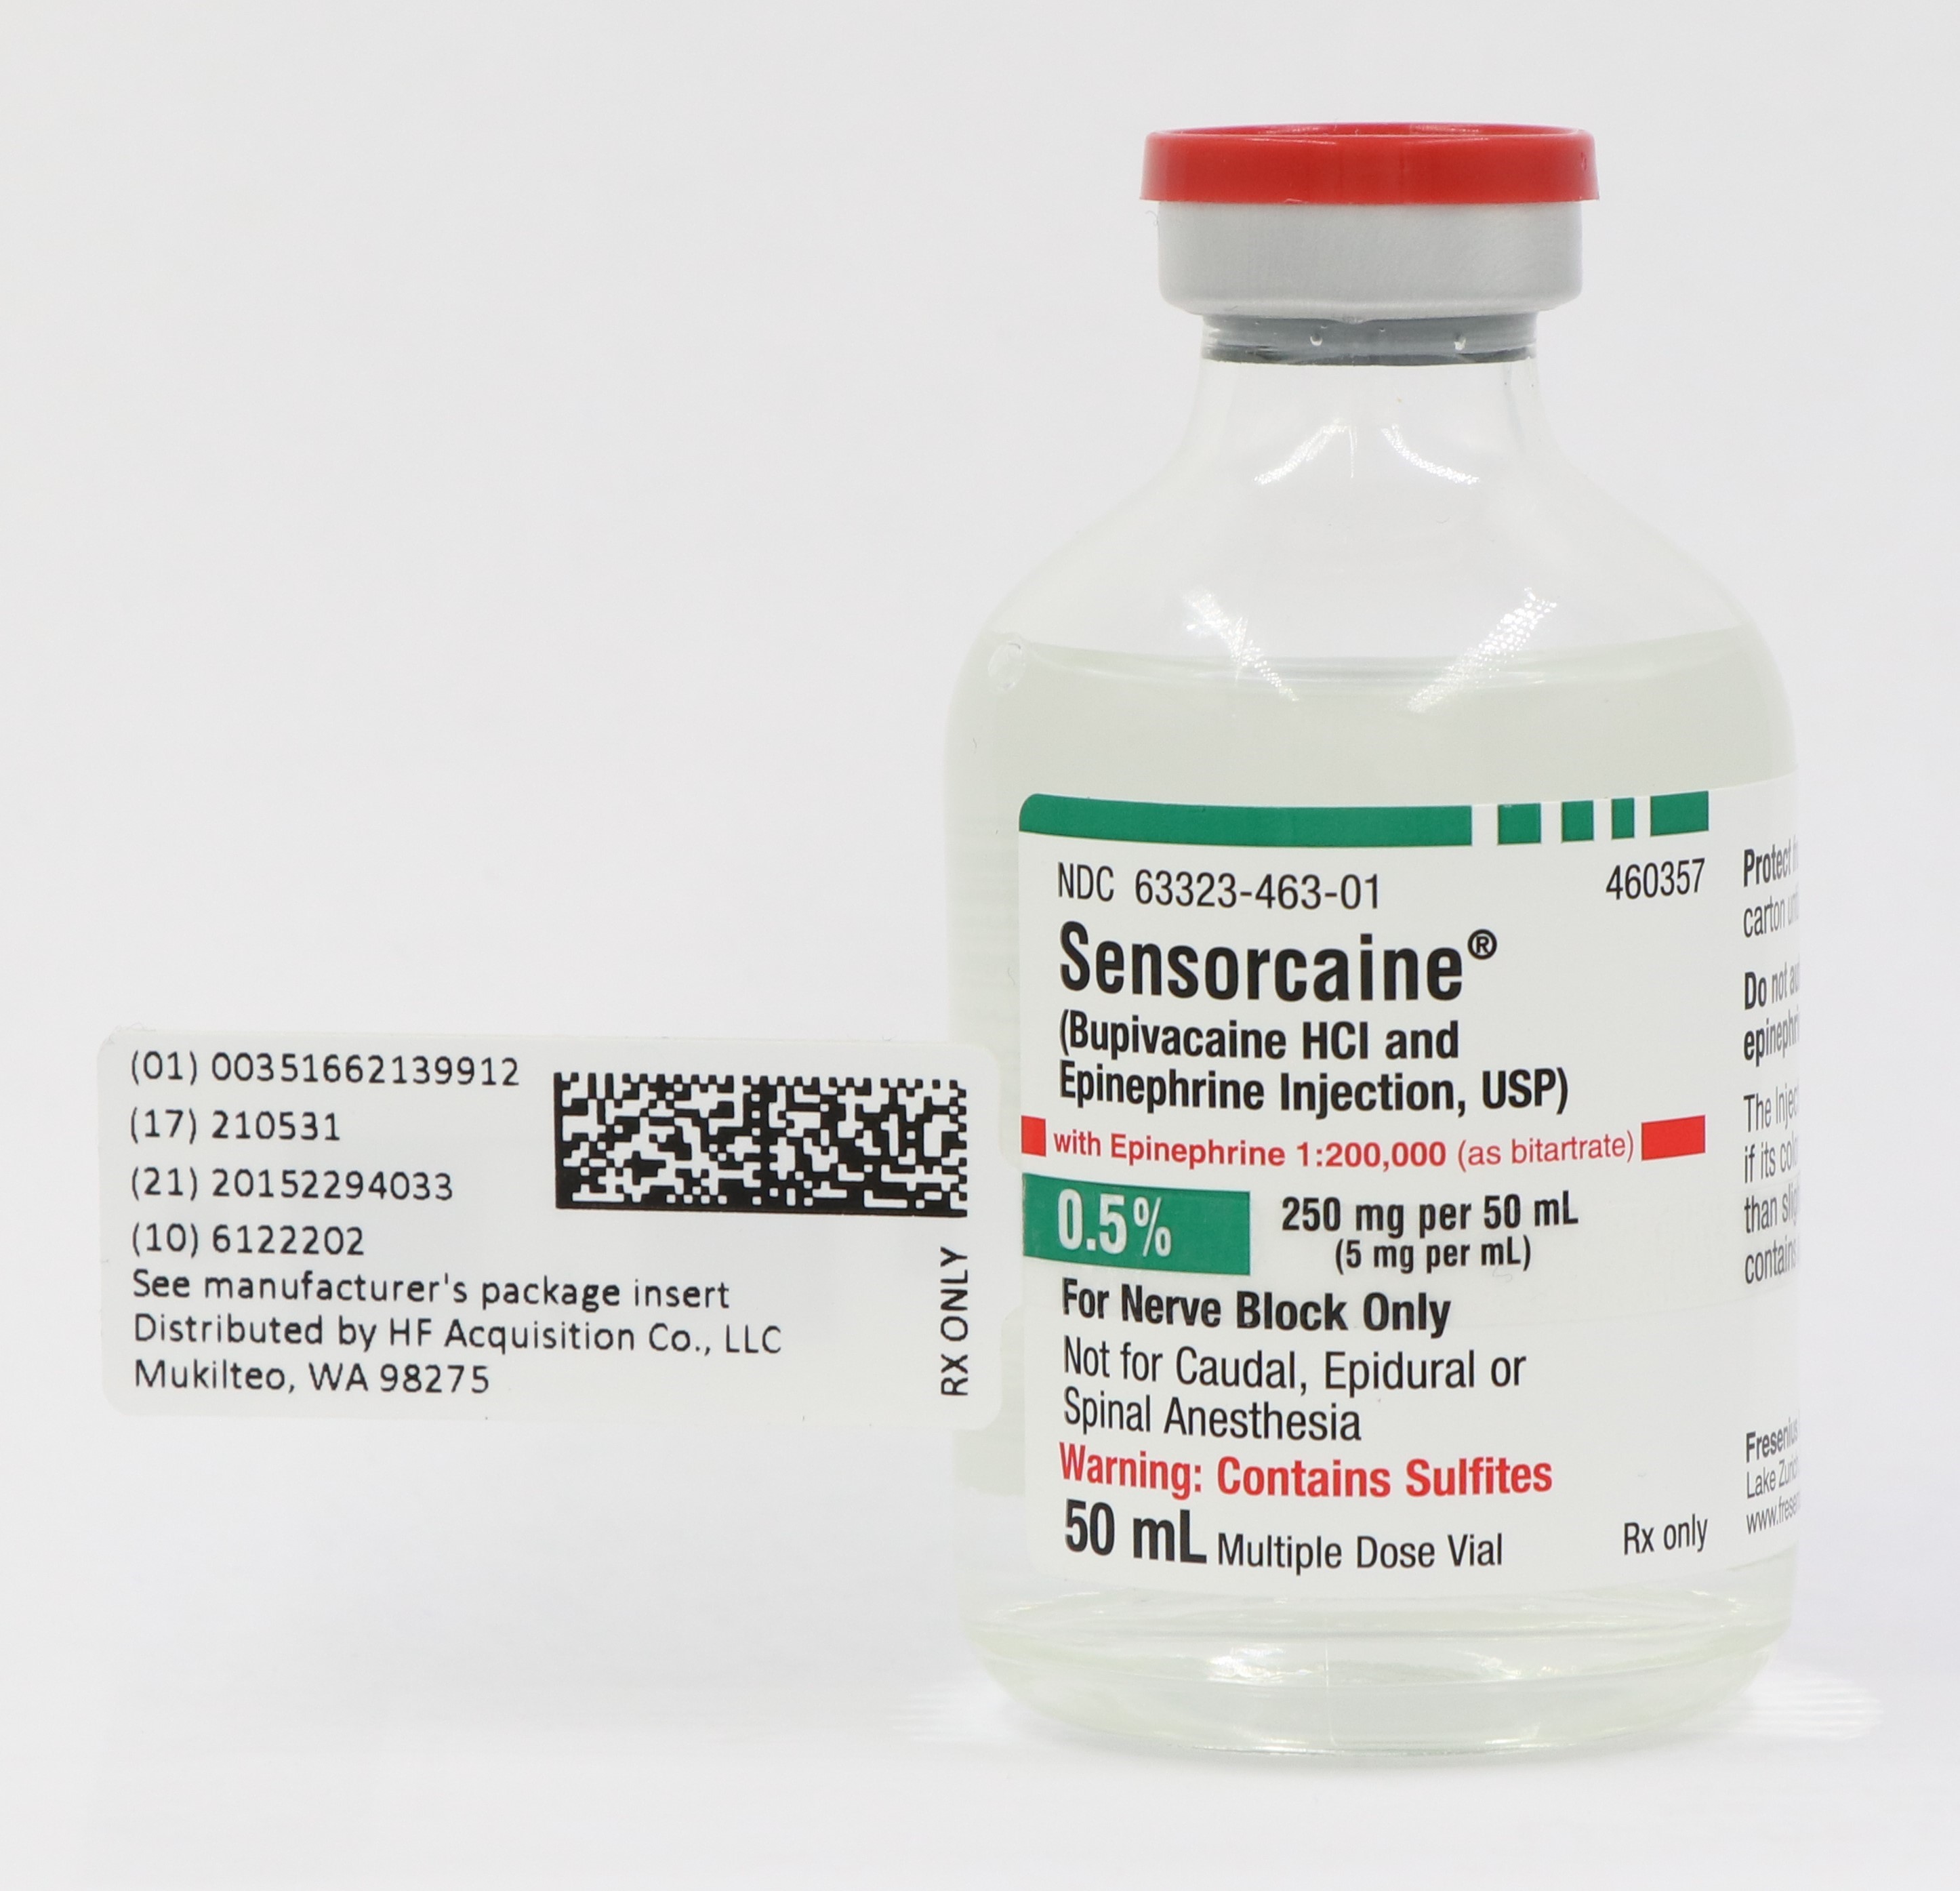 SWERIALIZED VIAL LABELING